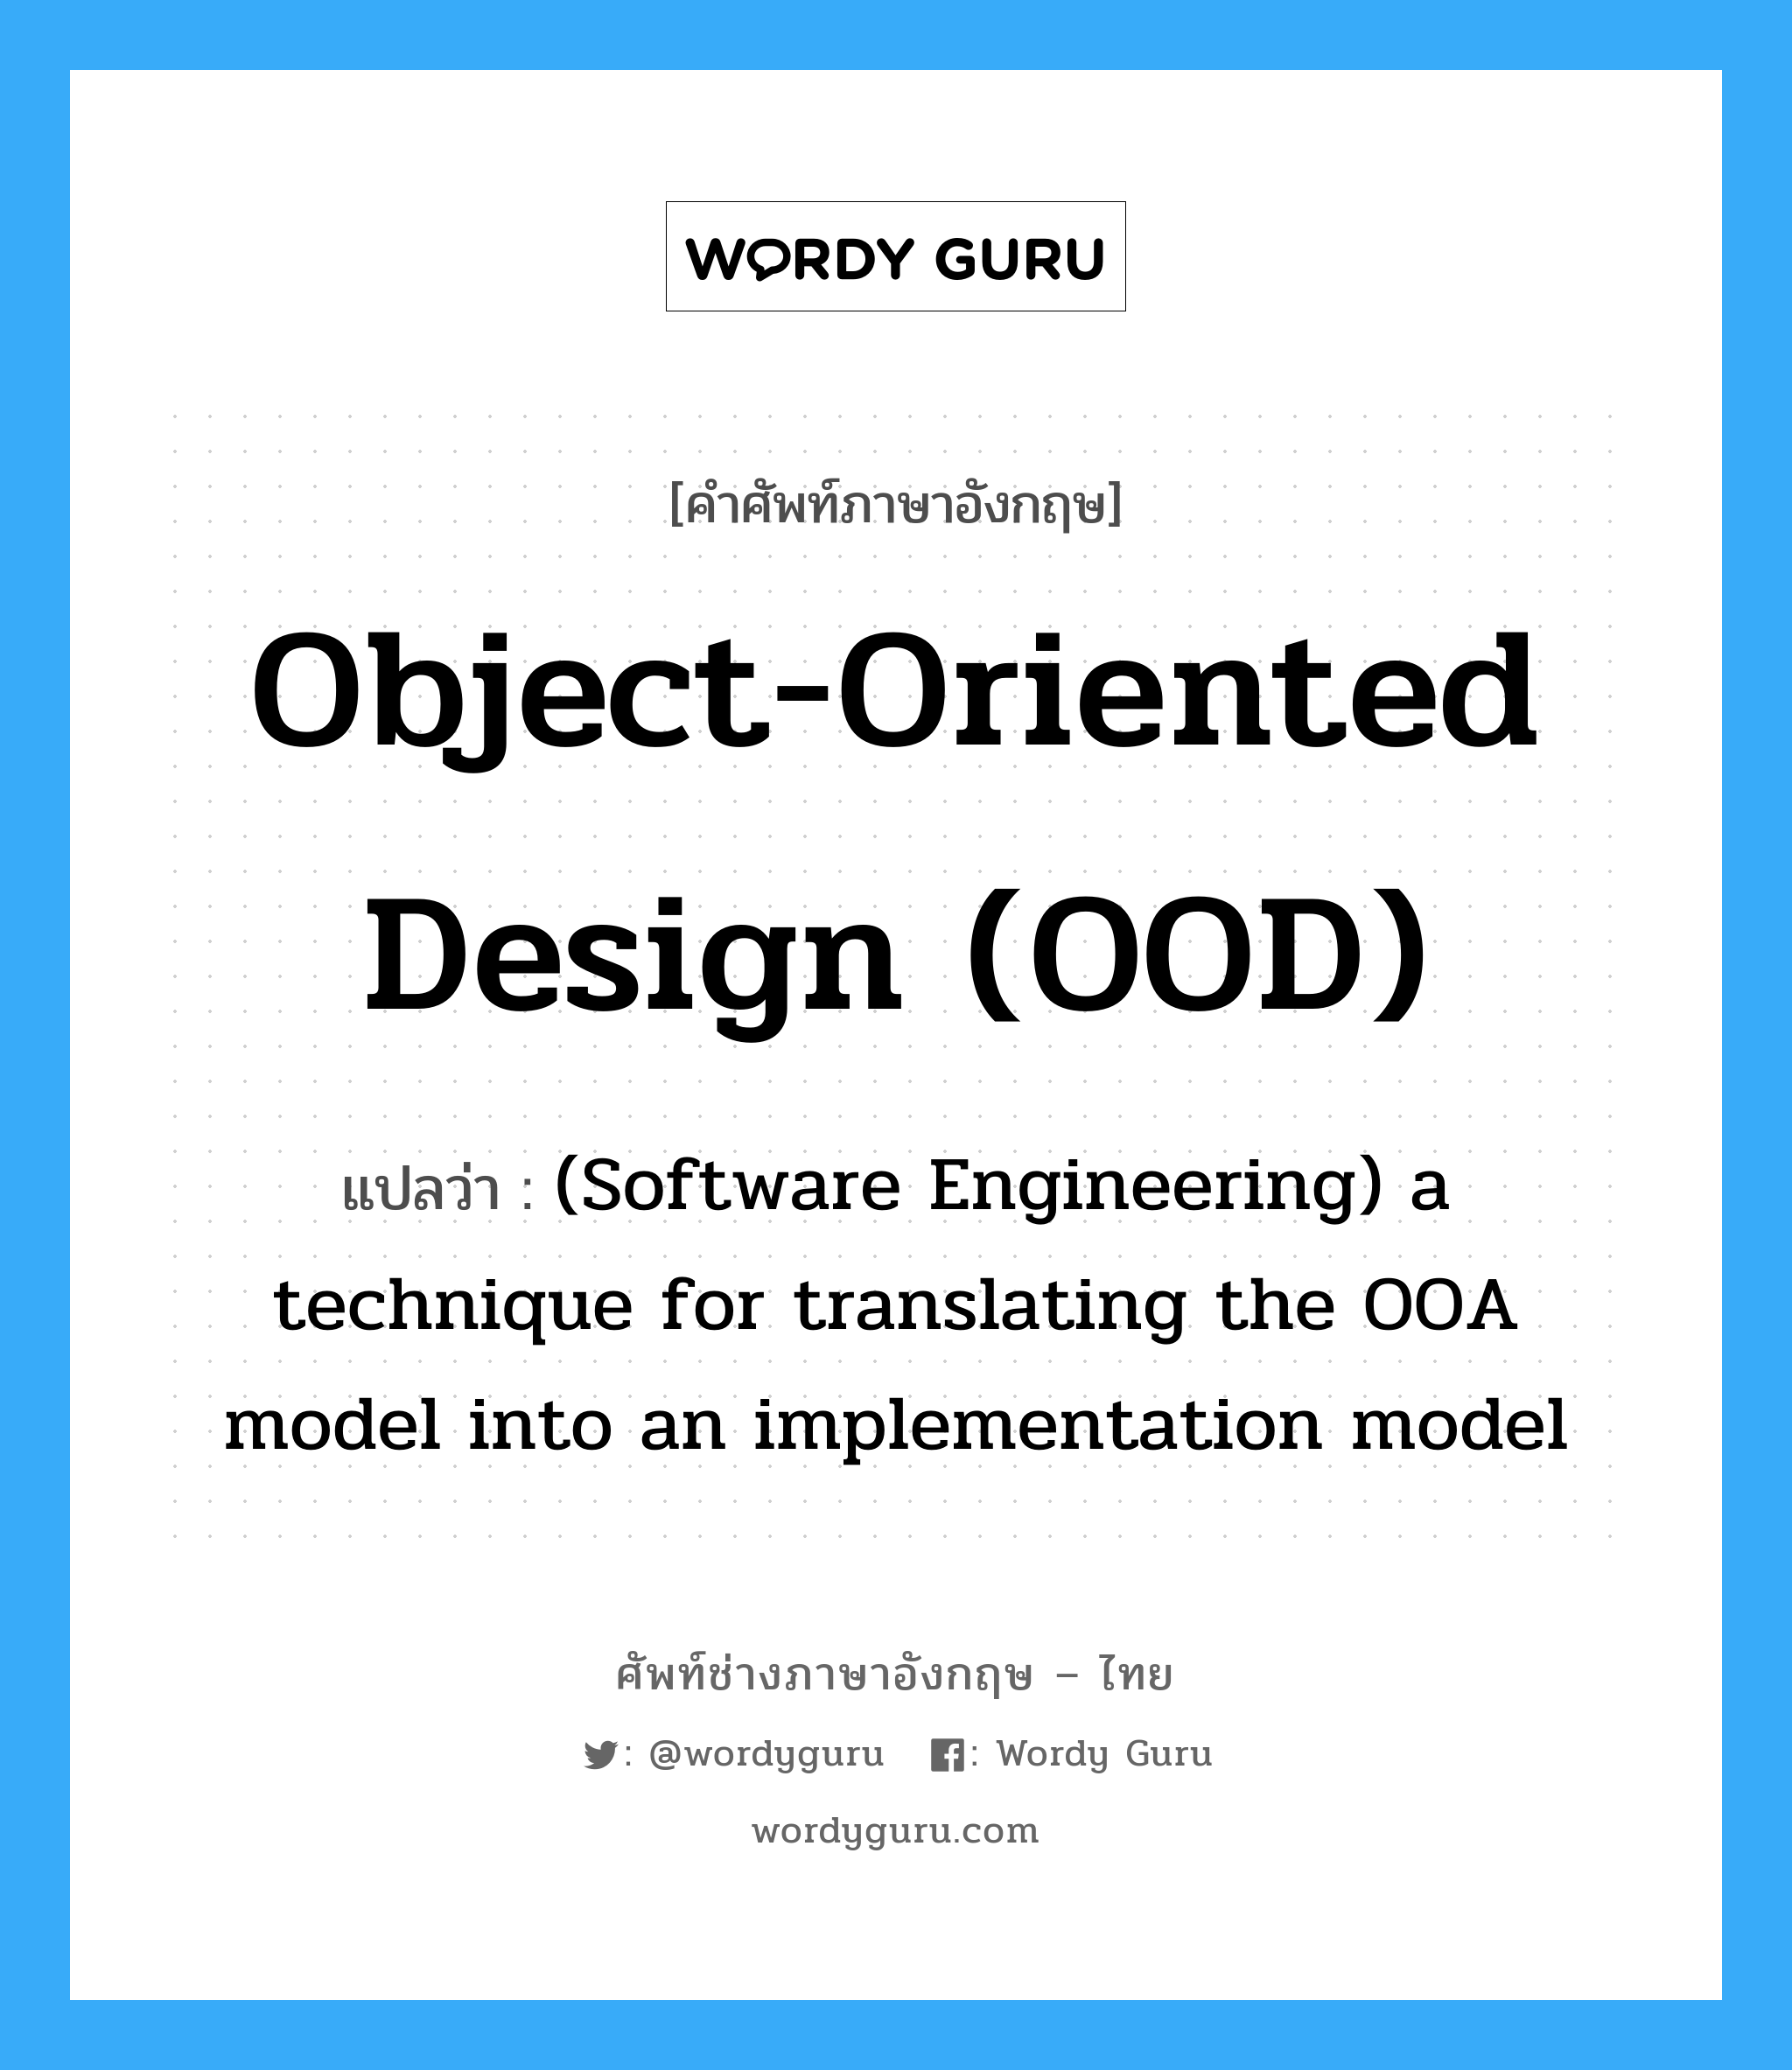 (Software Engineering) a technique for translating the OOA model into an implementation model ภาษาอังกฤษ?, คำศัพท์ช่างภาษาอังกฤษ - ไทย (Software Engineering) a technique for translating the OOA model into an implementation model คำศัพท์ภาษาอังกฤษ (Software Engineering) a technique for translating the OOA model into an implementation model แปลว่า Object-oriented design (OOD)